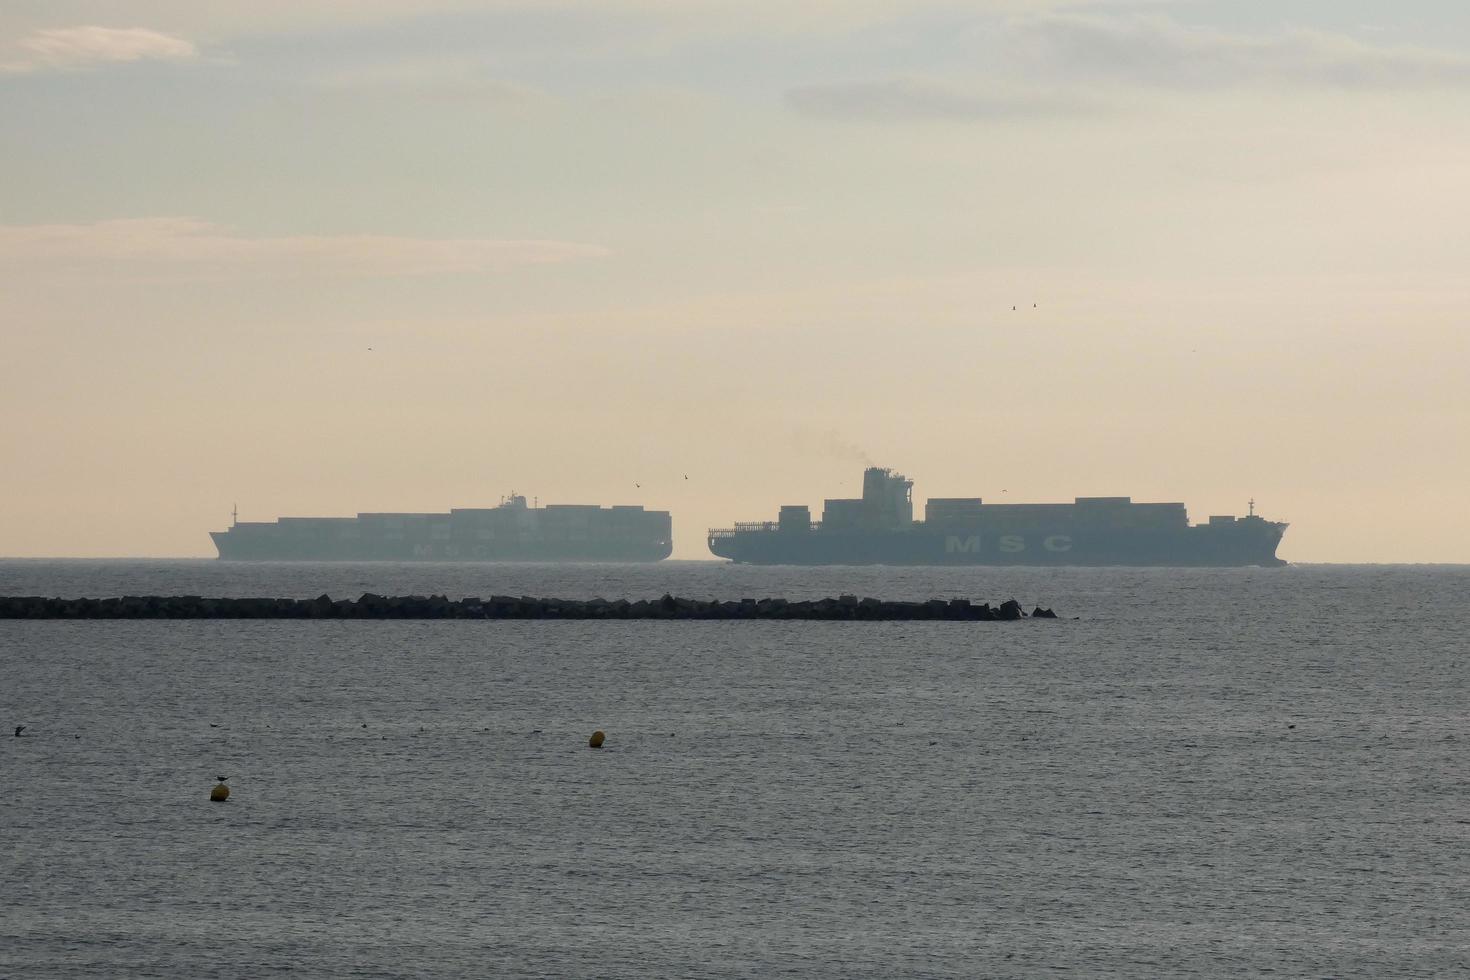 Cargo ships entering or leaving the port photo